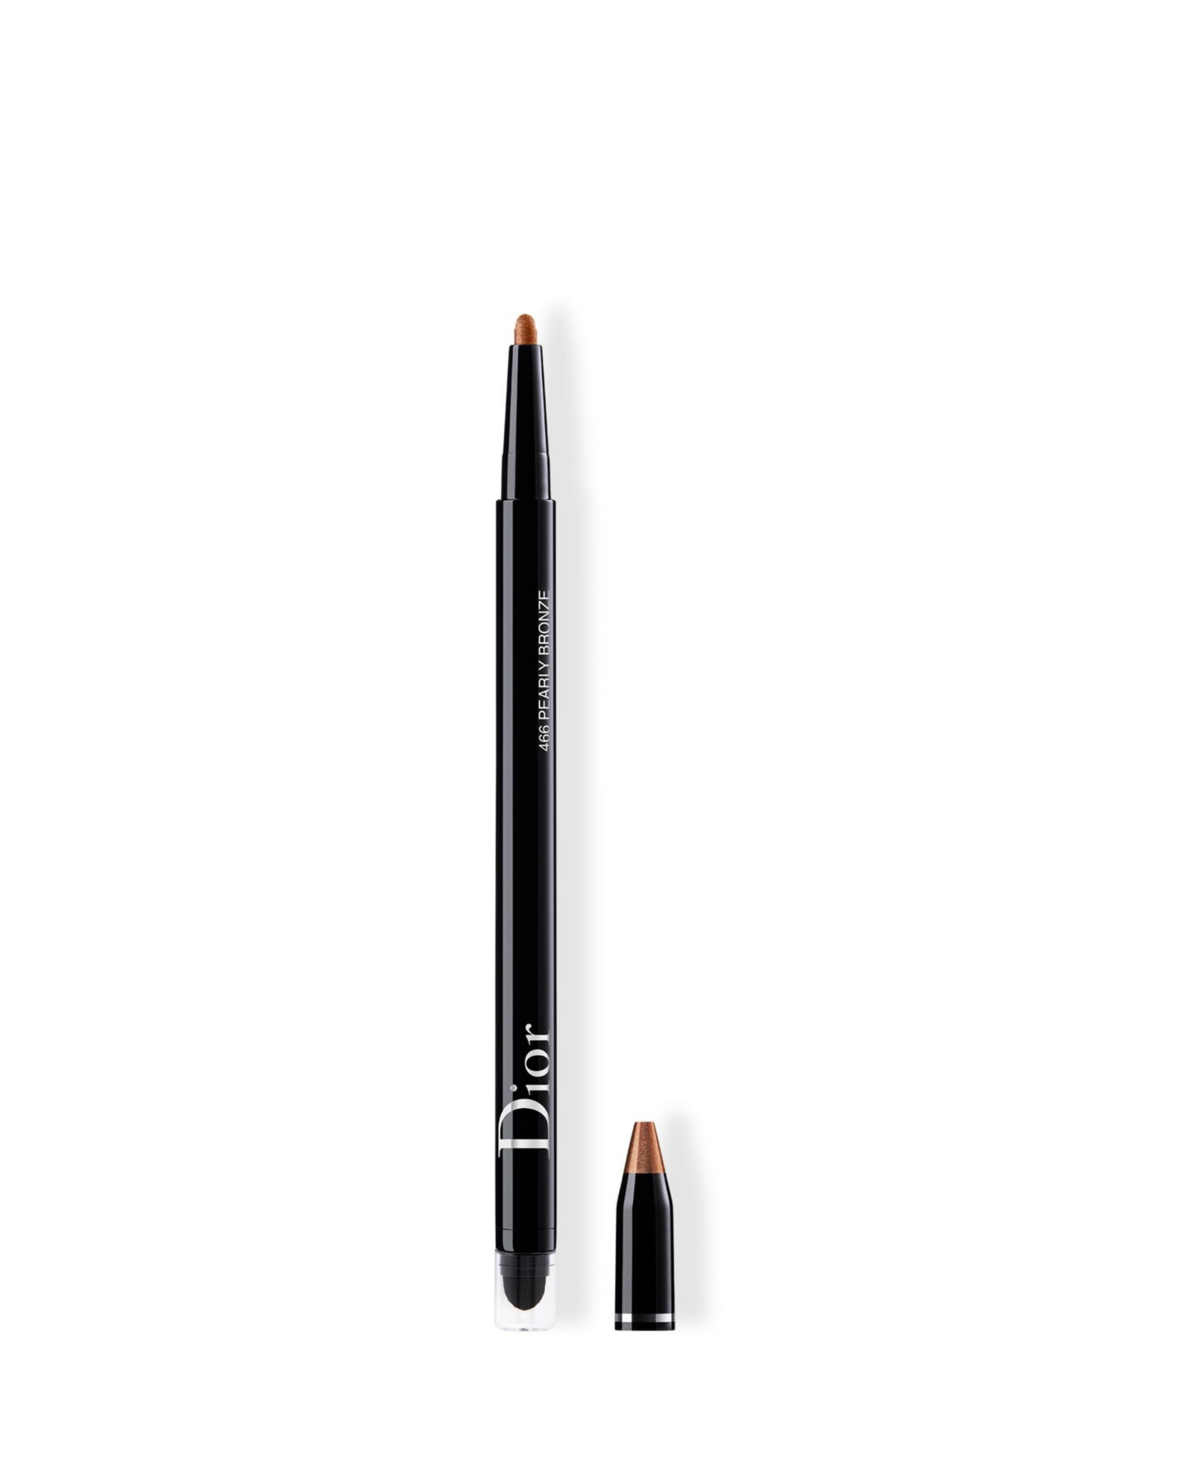 Dior Show 24h Stylo Waterproof Eyeliner In Pearly Bronze